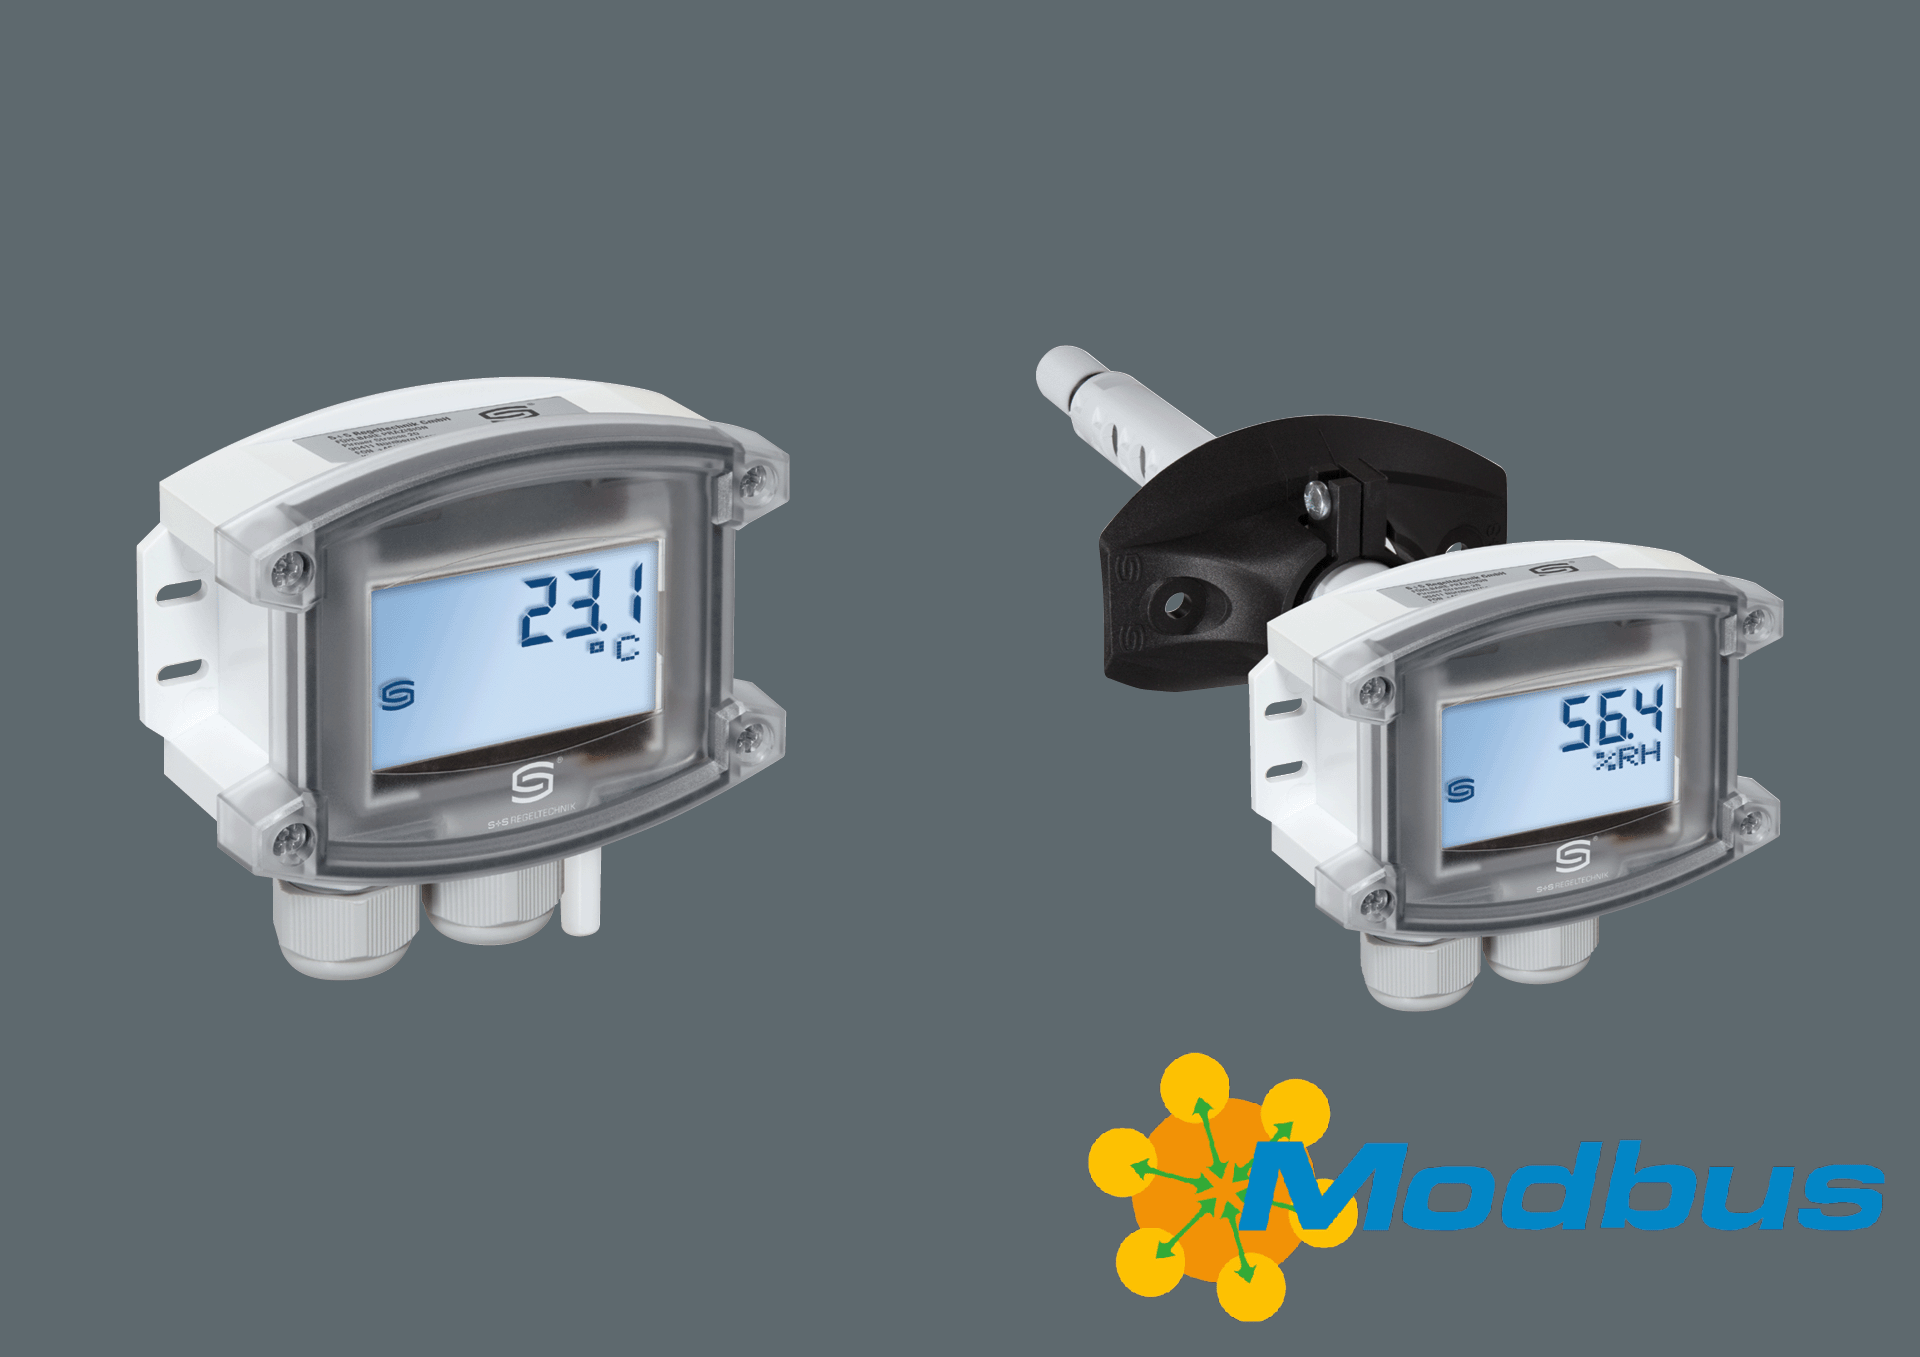 Outdoor temperature sensor and duct humidity sensor with Modbus connection and logo in the bottom right-hand corner